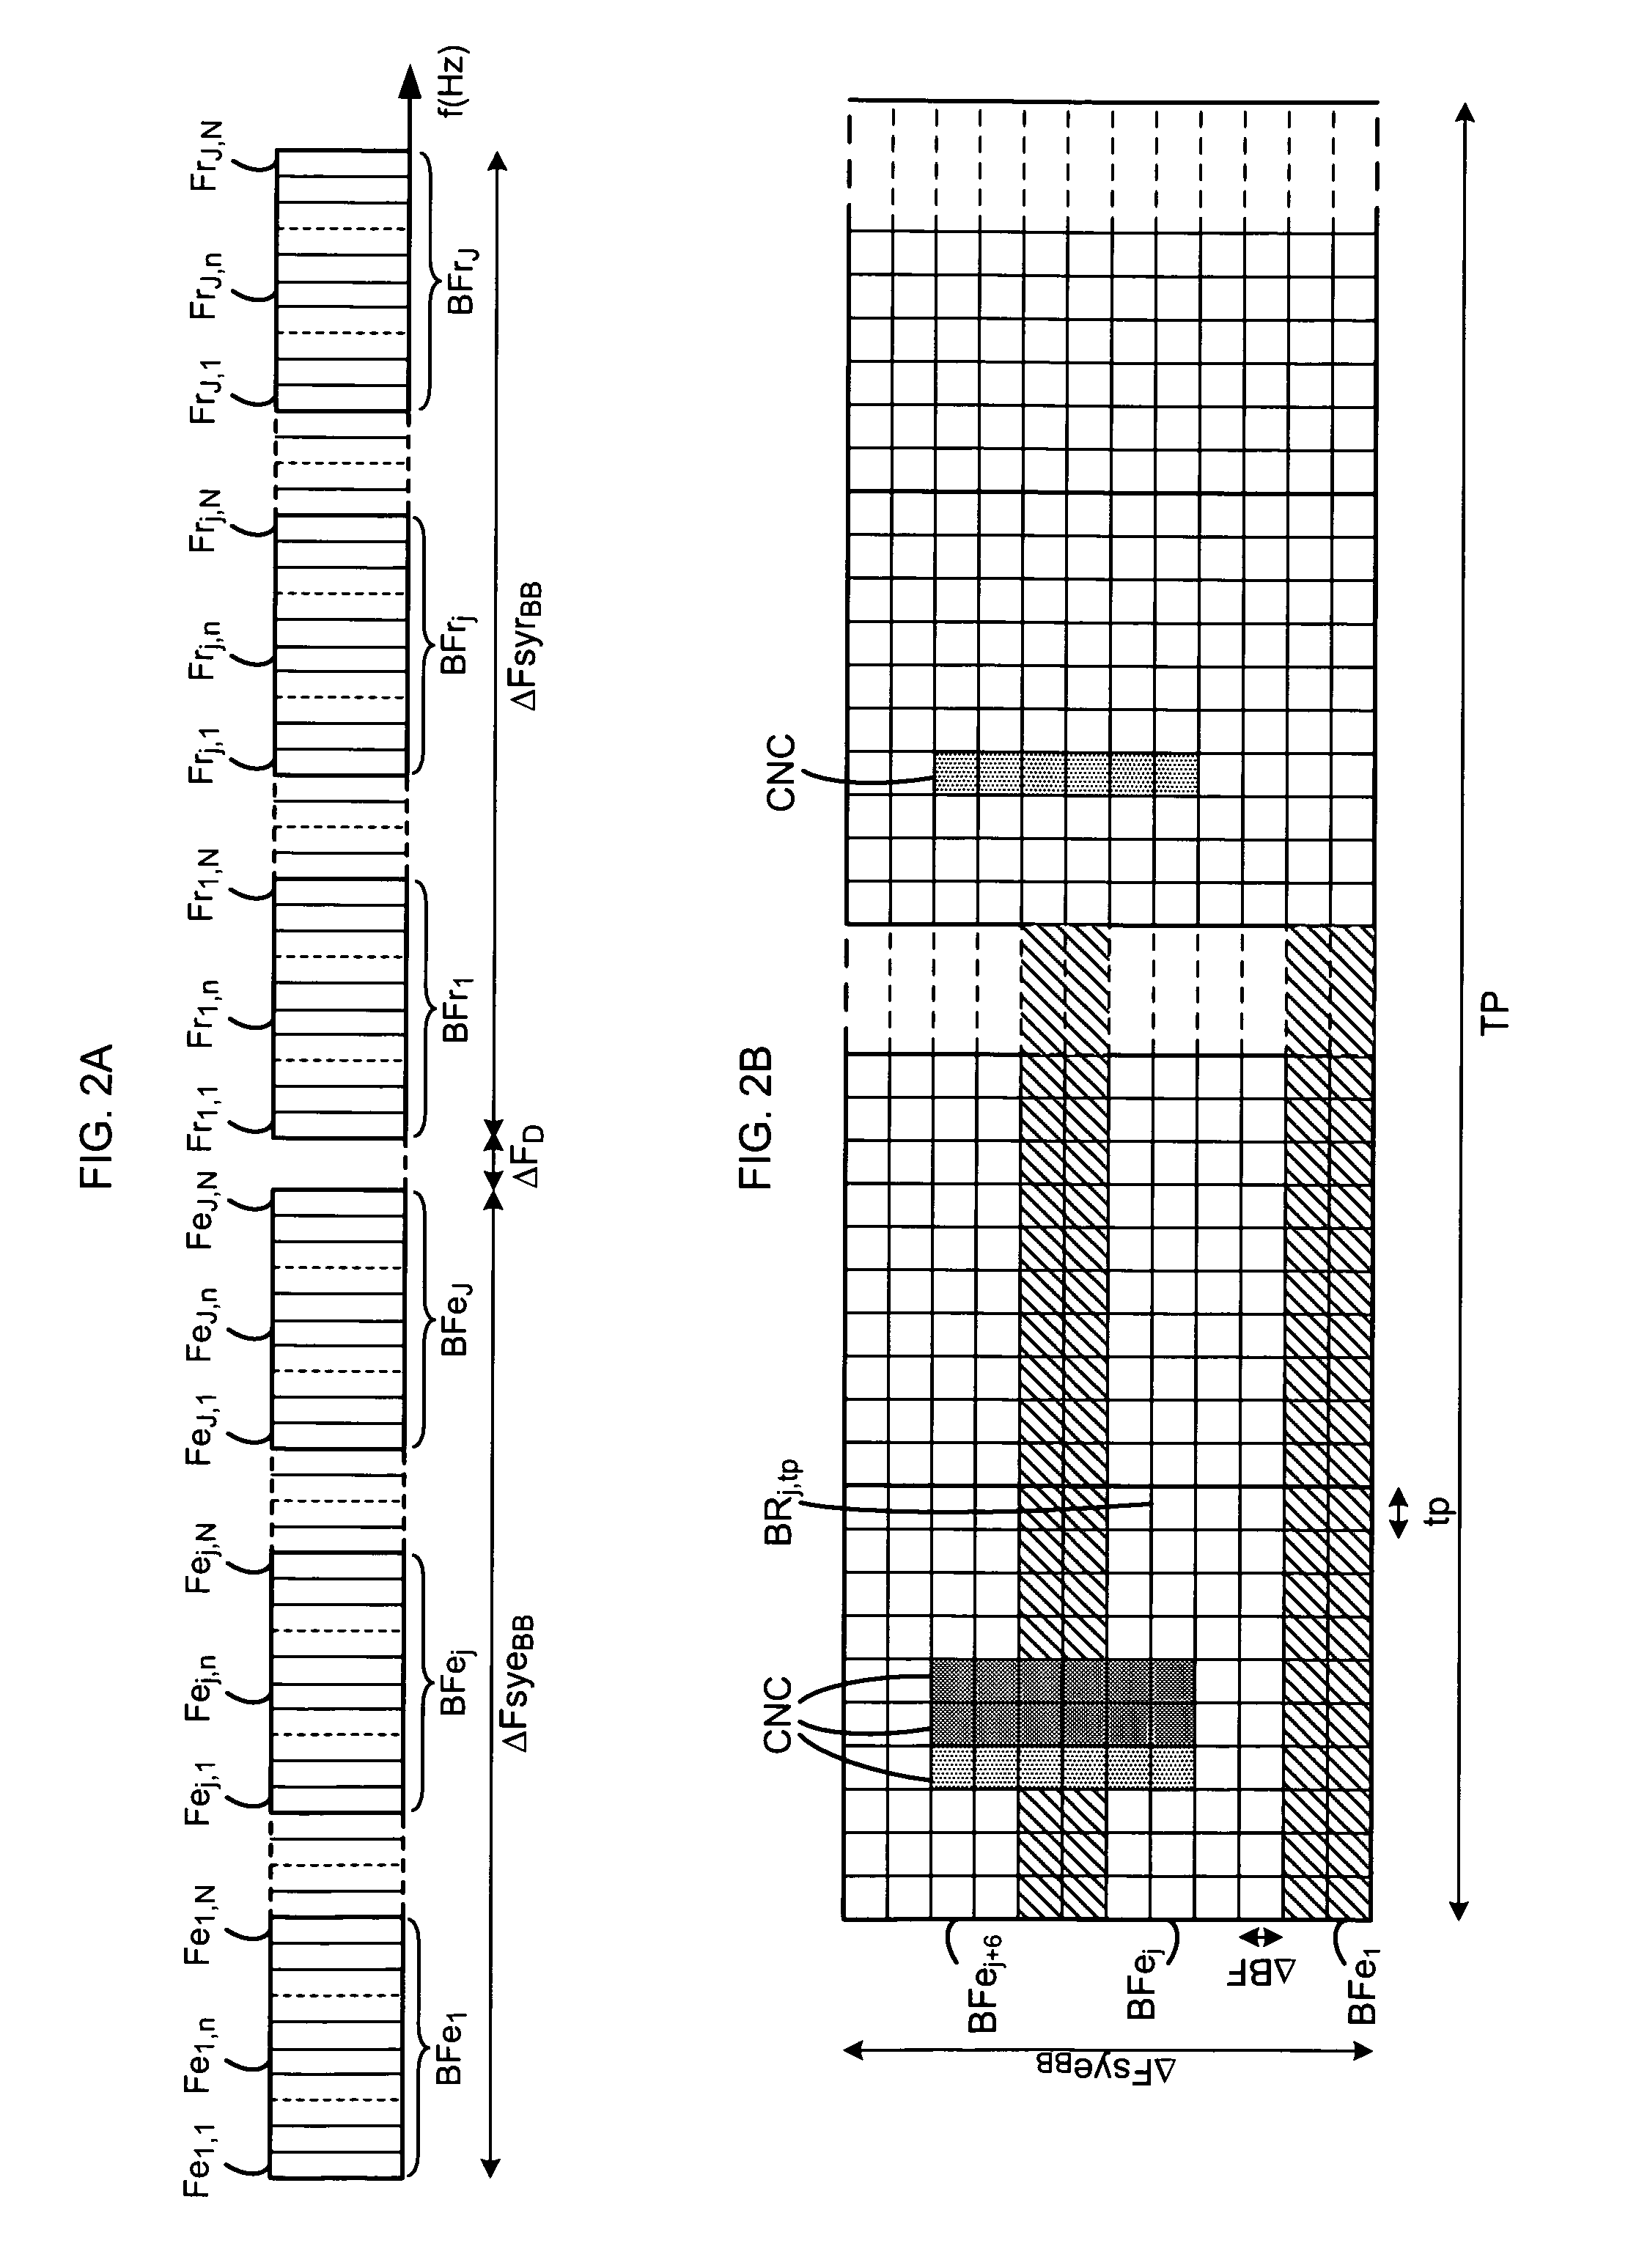 Method for scheduling frequency channels